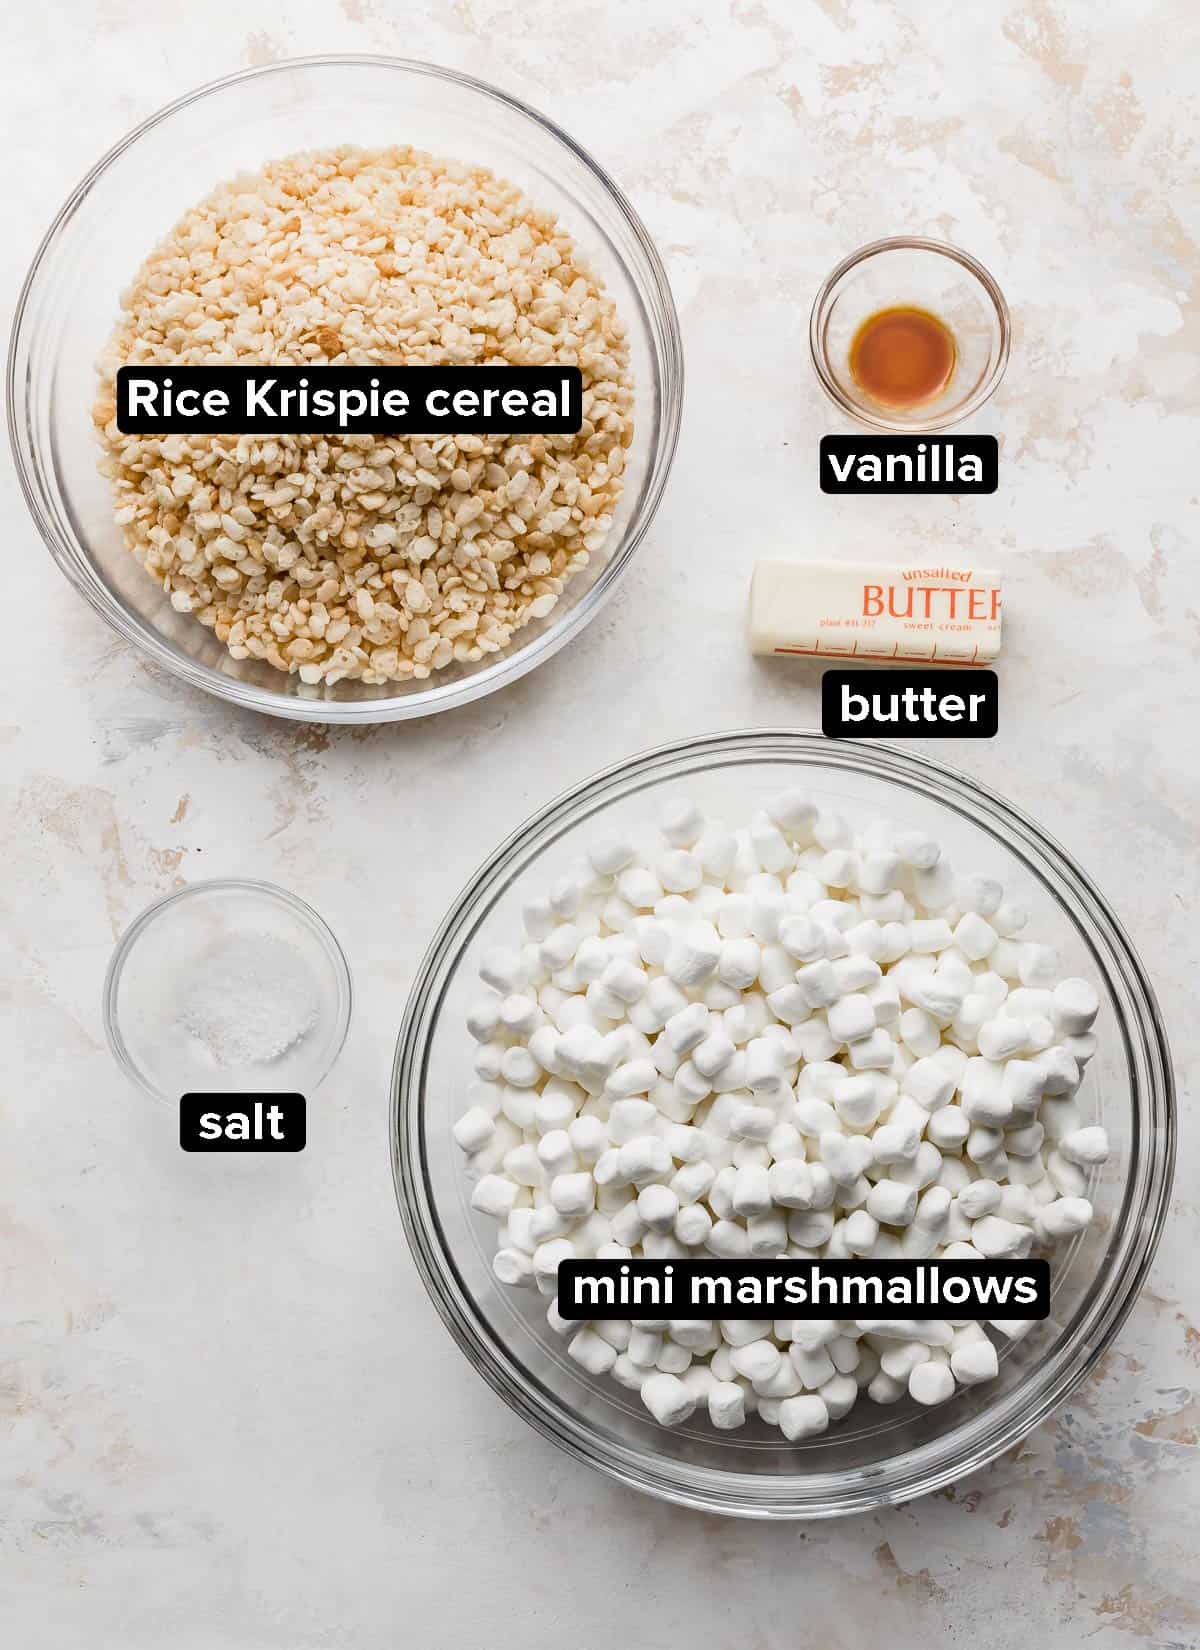 Rice Krispies Treats ingredients in glass bowls on a white textured background.